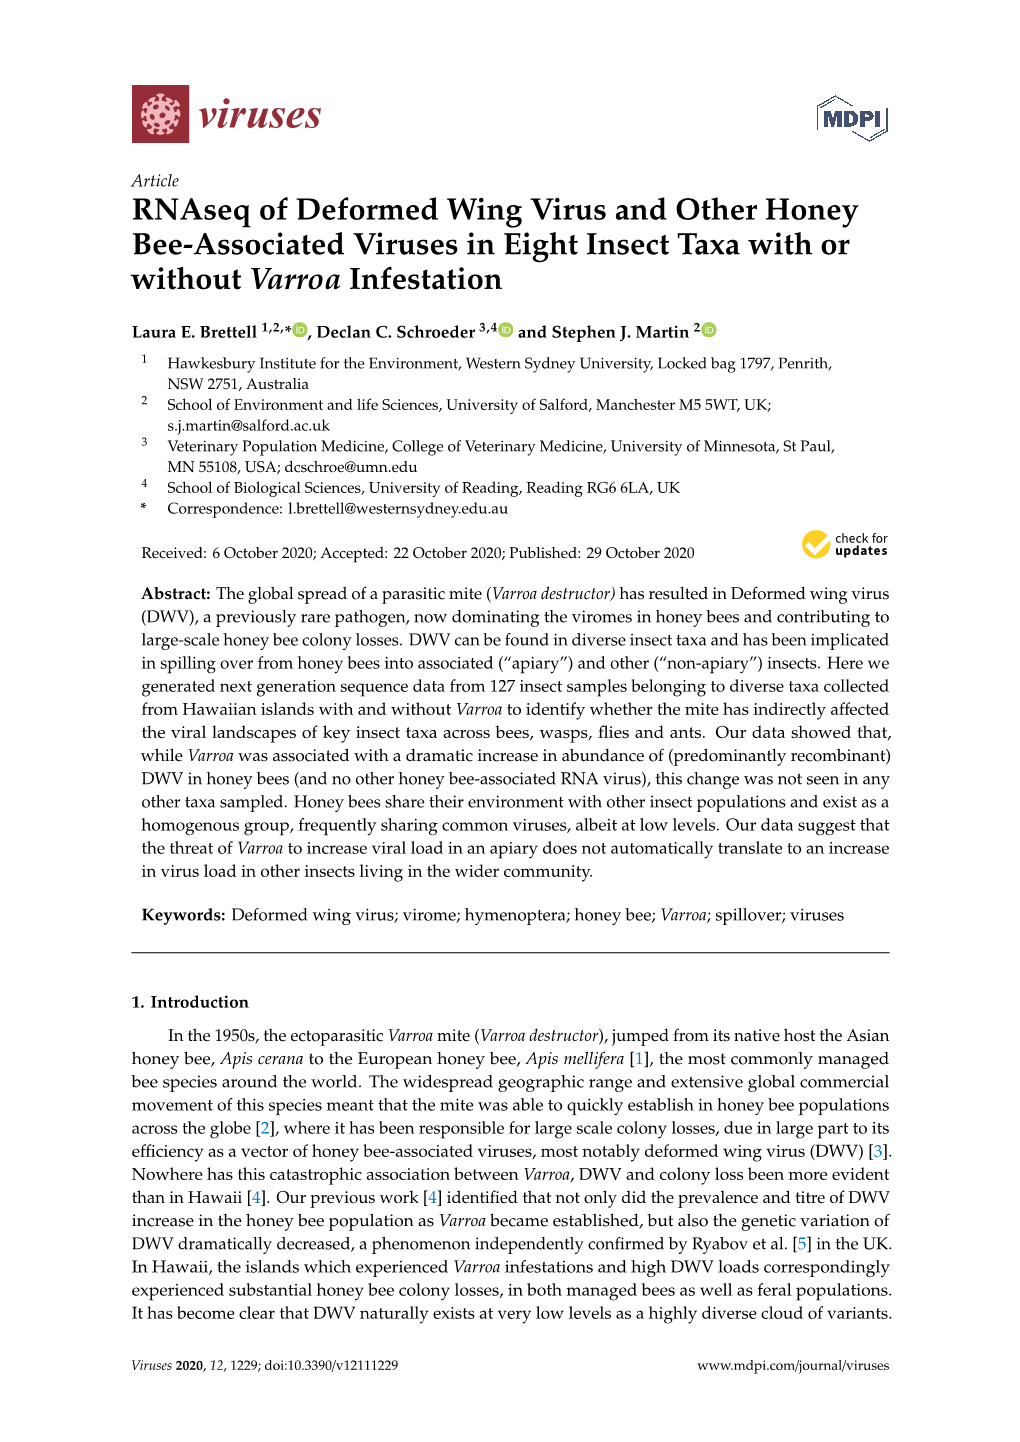 Rnaseq of Deformed Wing Virus and Other Honey Bee-Associated Viruses in Eight Insect Taxa with Or Without Varroa Infestation